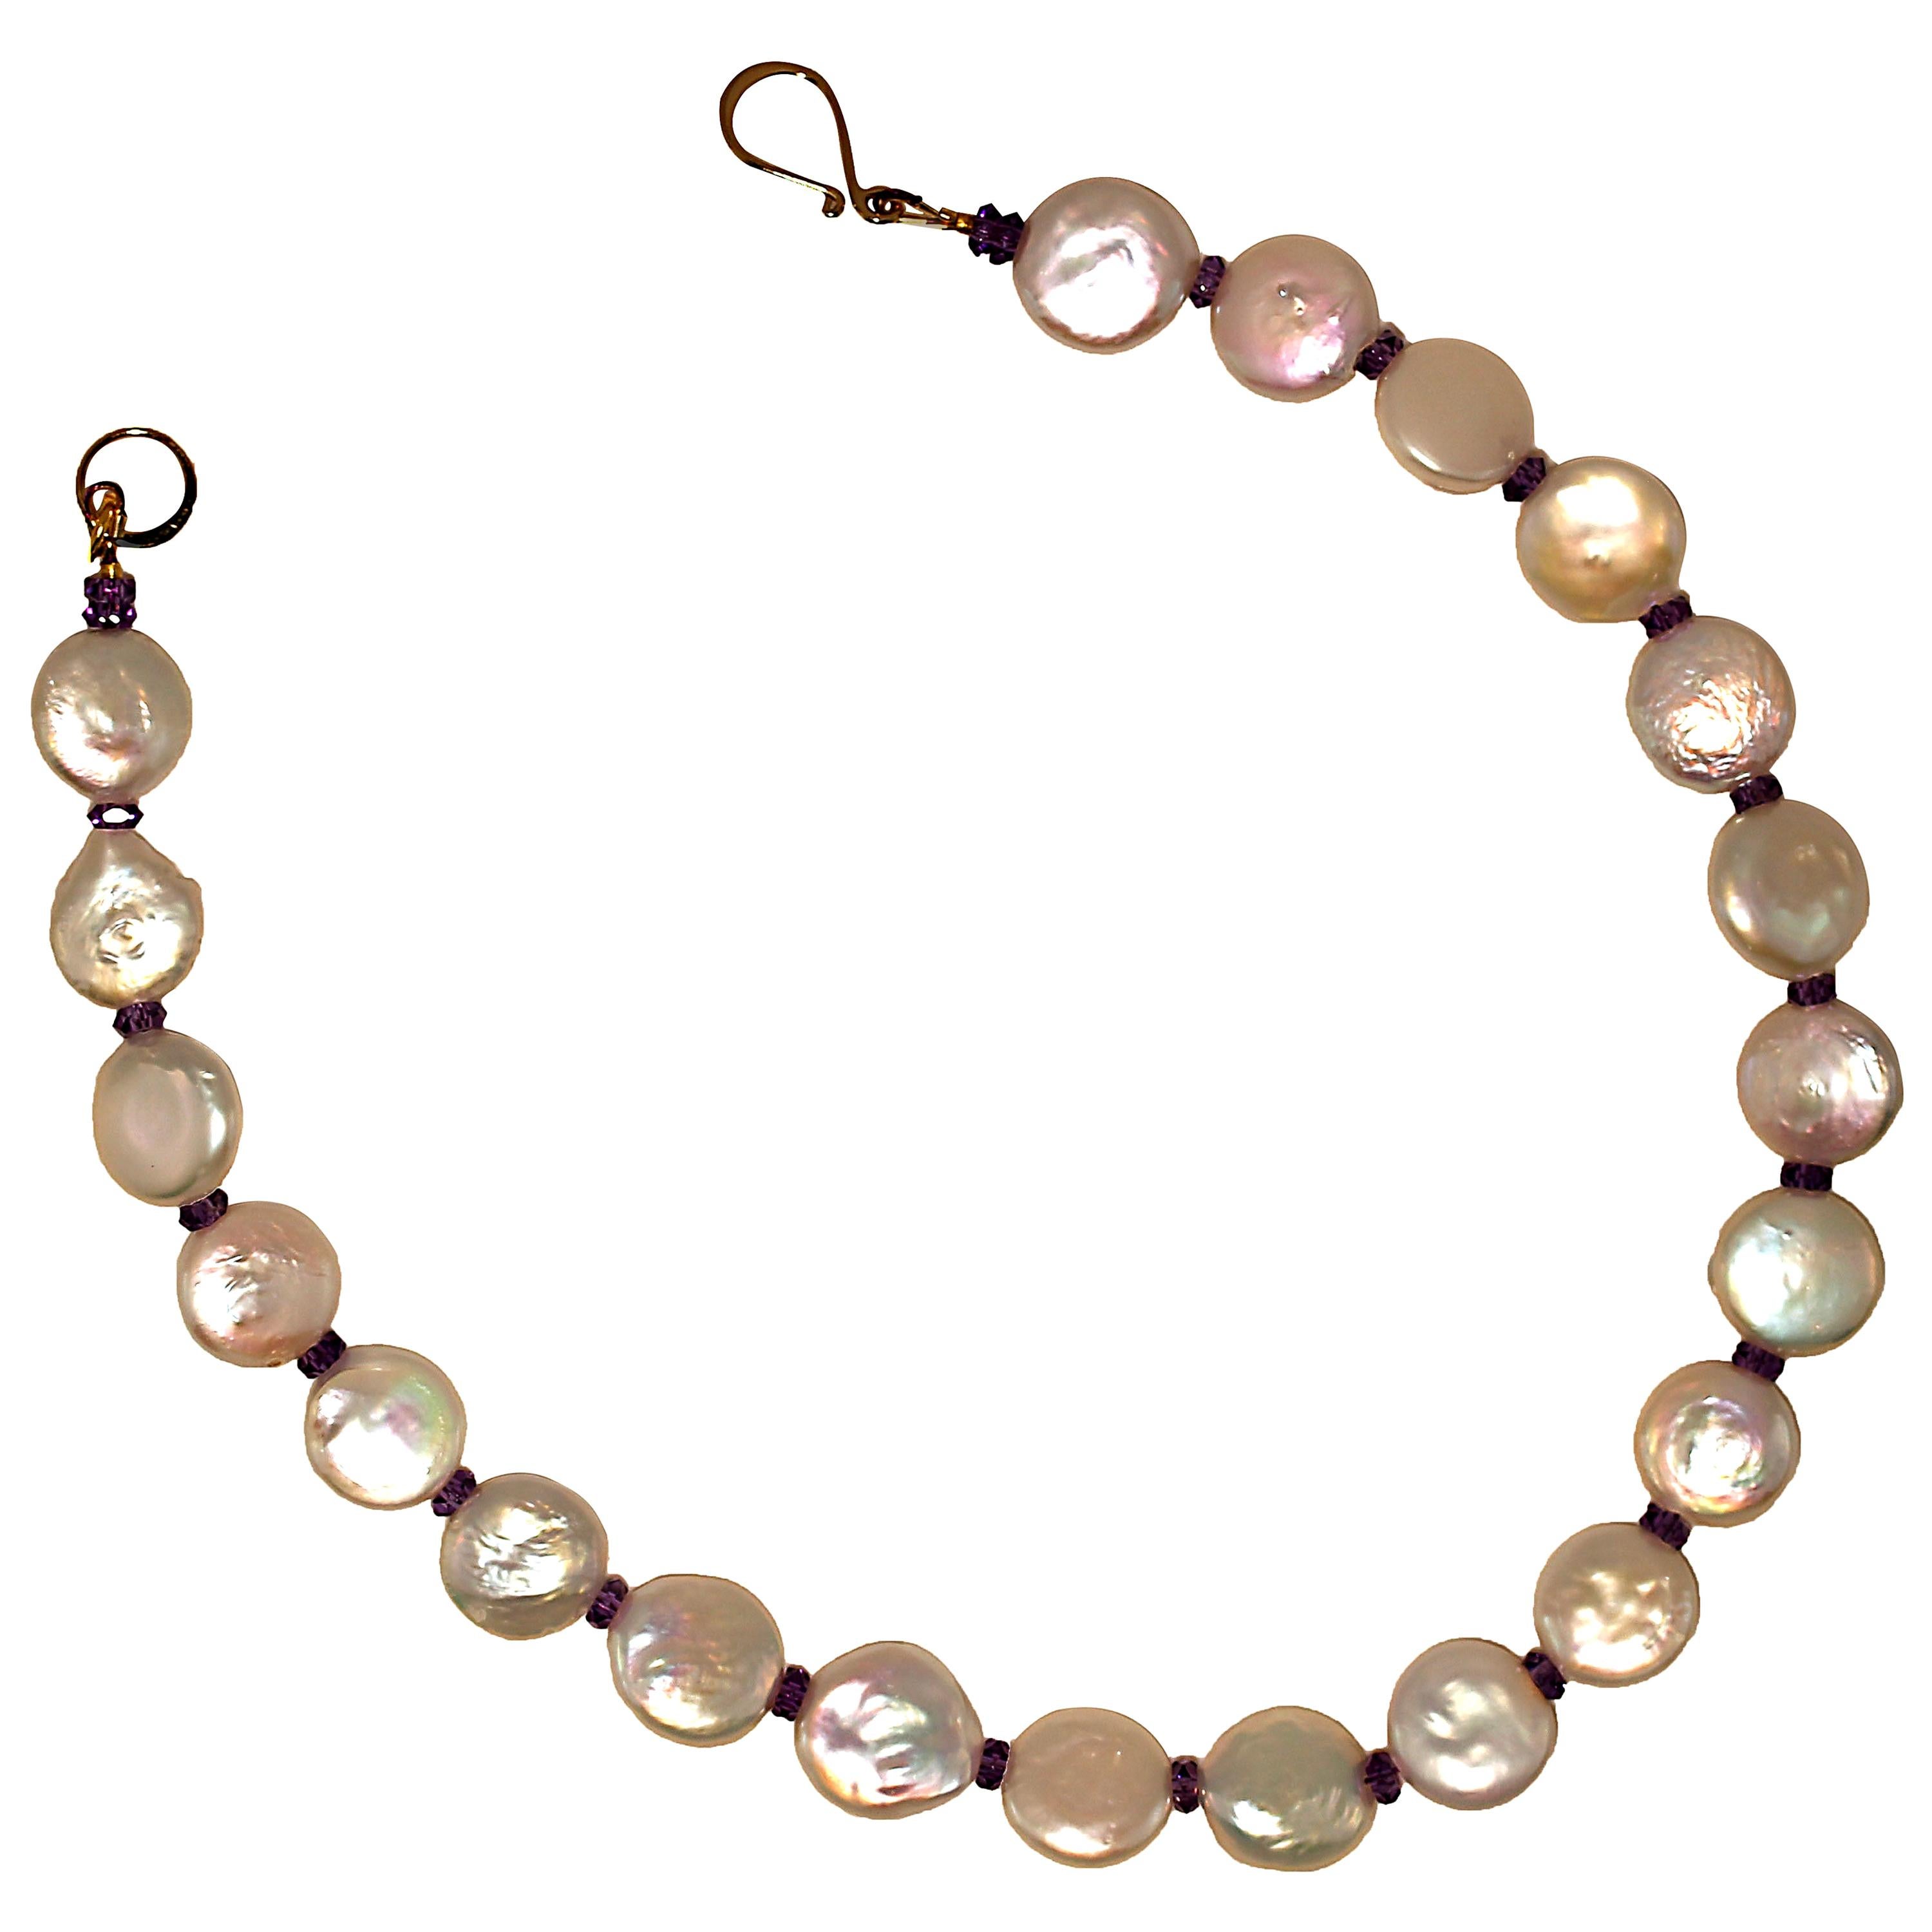 Own the jewelry you desire.

Handmade choker necklace of glowing white Coin Pearls accented with faceted rondelles of Amethyst.  This unique 15 inch choker necklace features 14MM iridescent Coin Pearls and 4MM faceted sparkling purple Amethysts. It